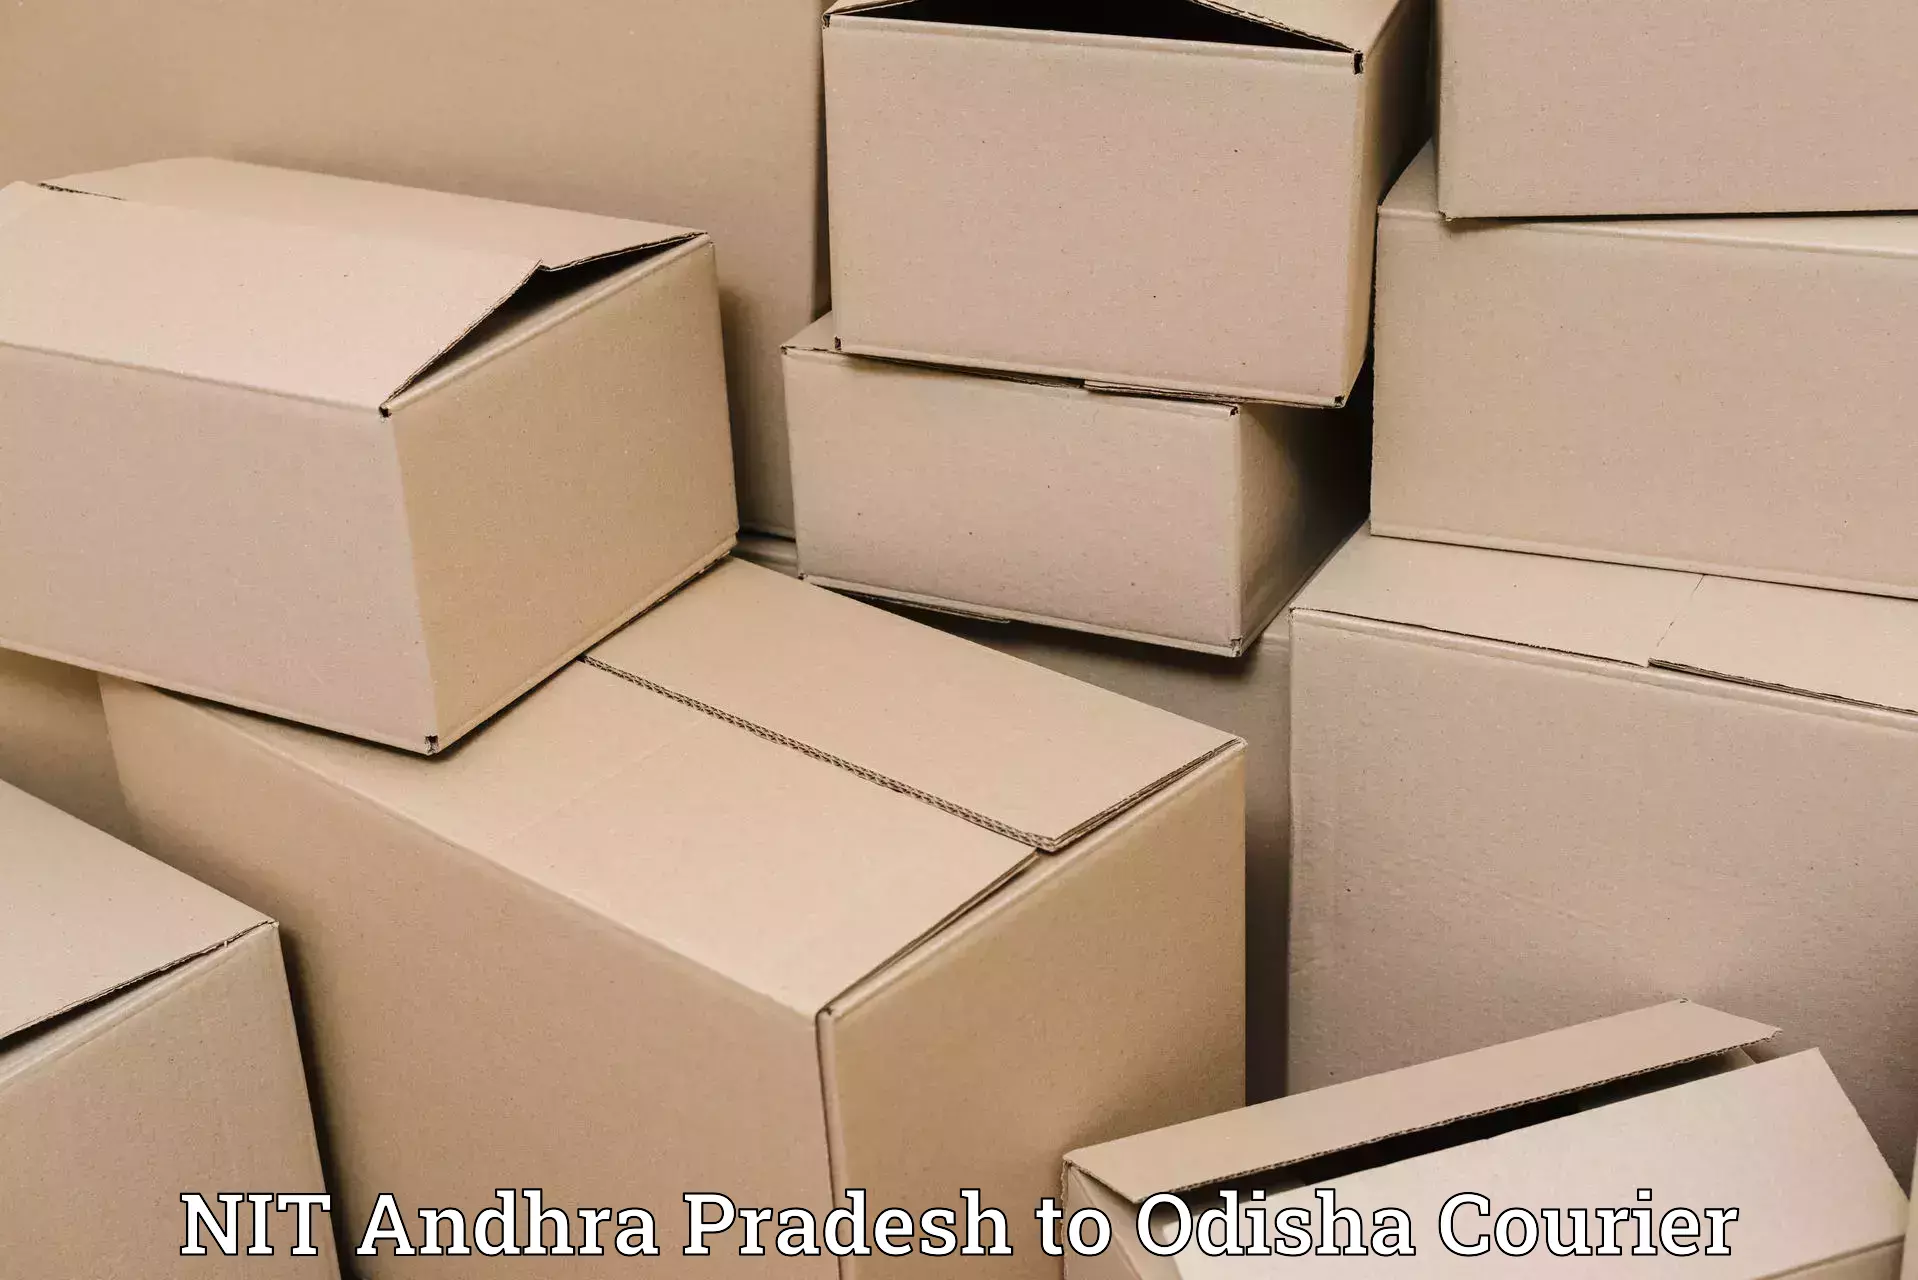 Efficient parcel tracking in NIT Andhra Pradesh to Anandapur